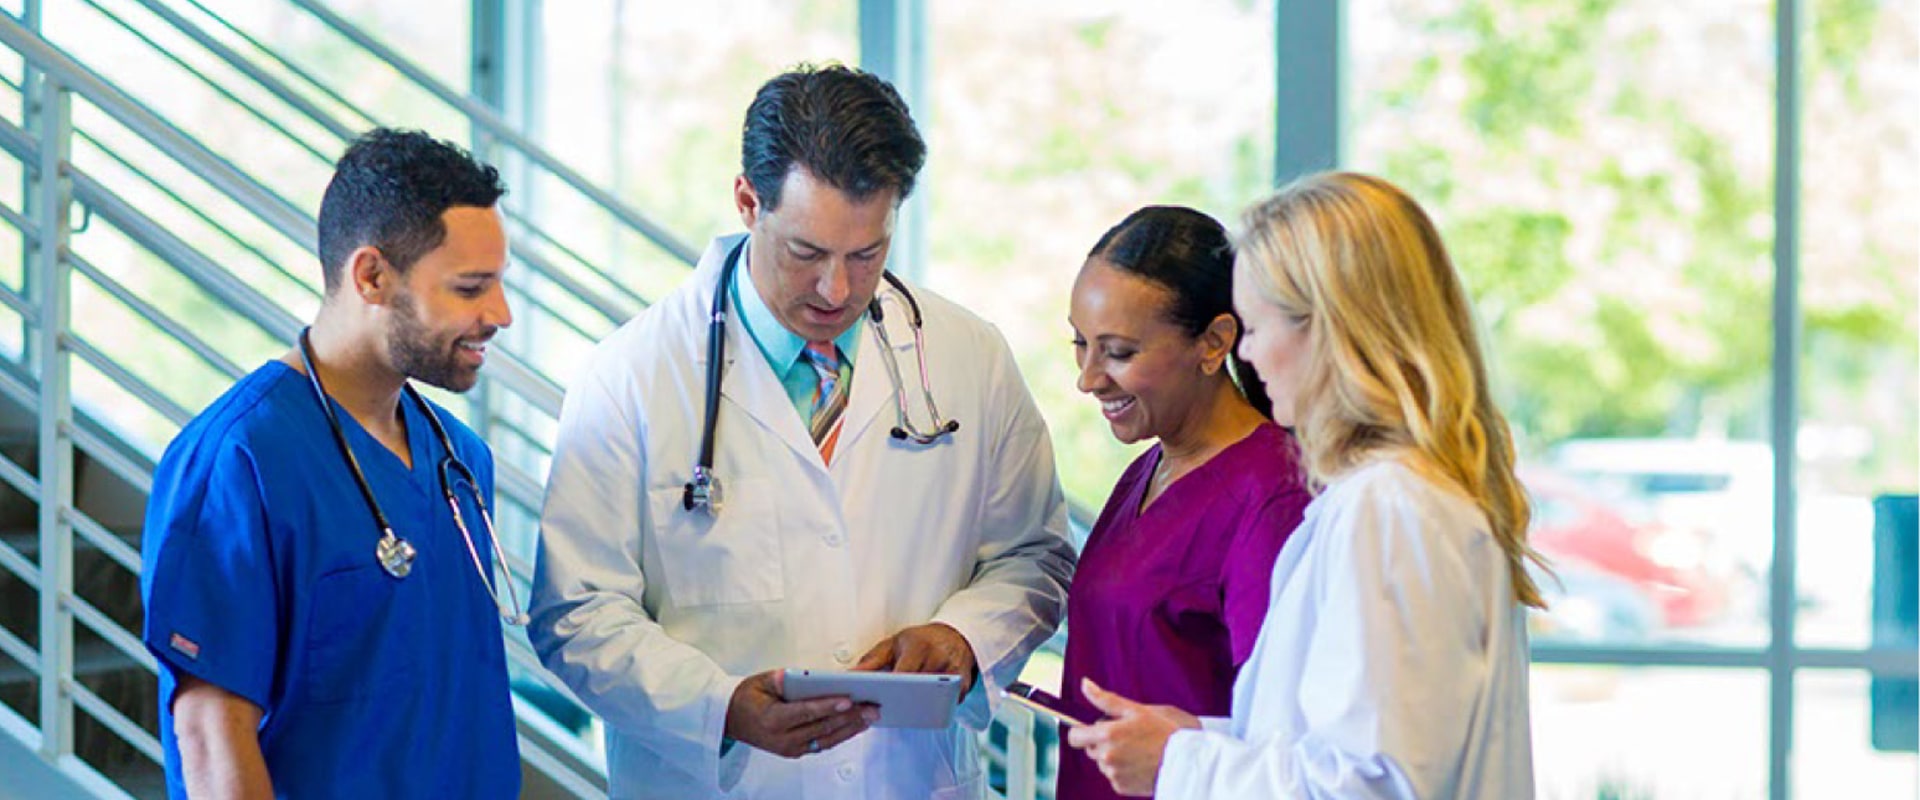 Networking with Medical Professionals: 6 Best Practices